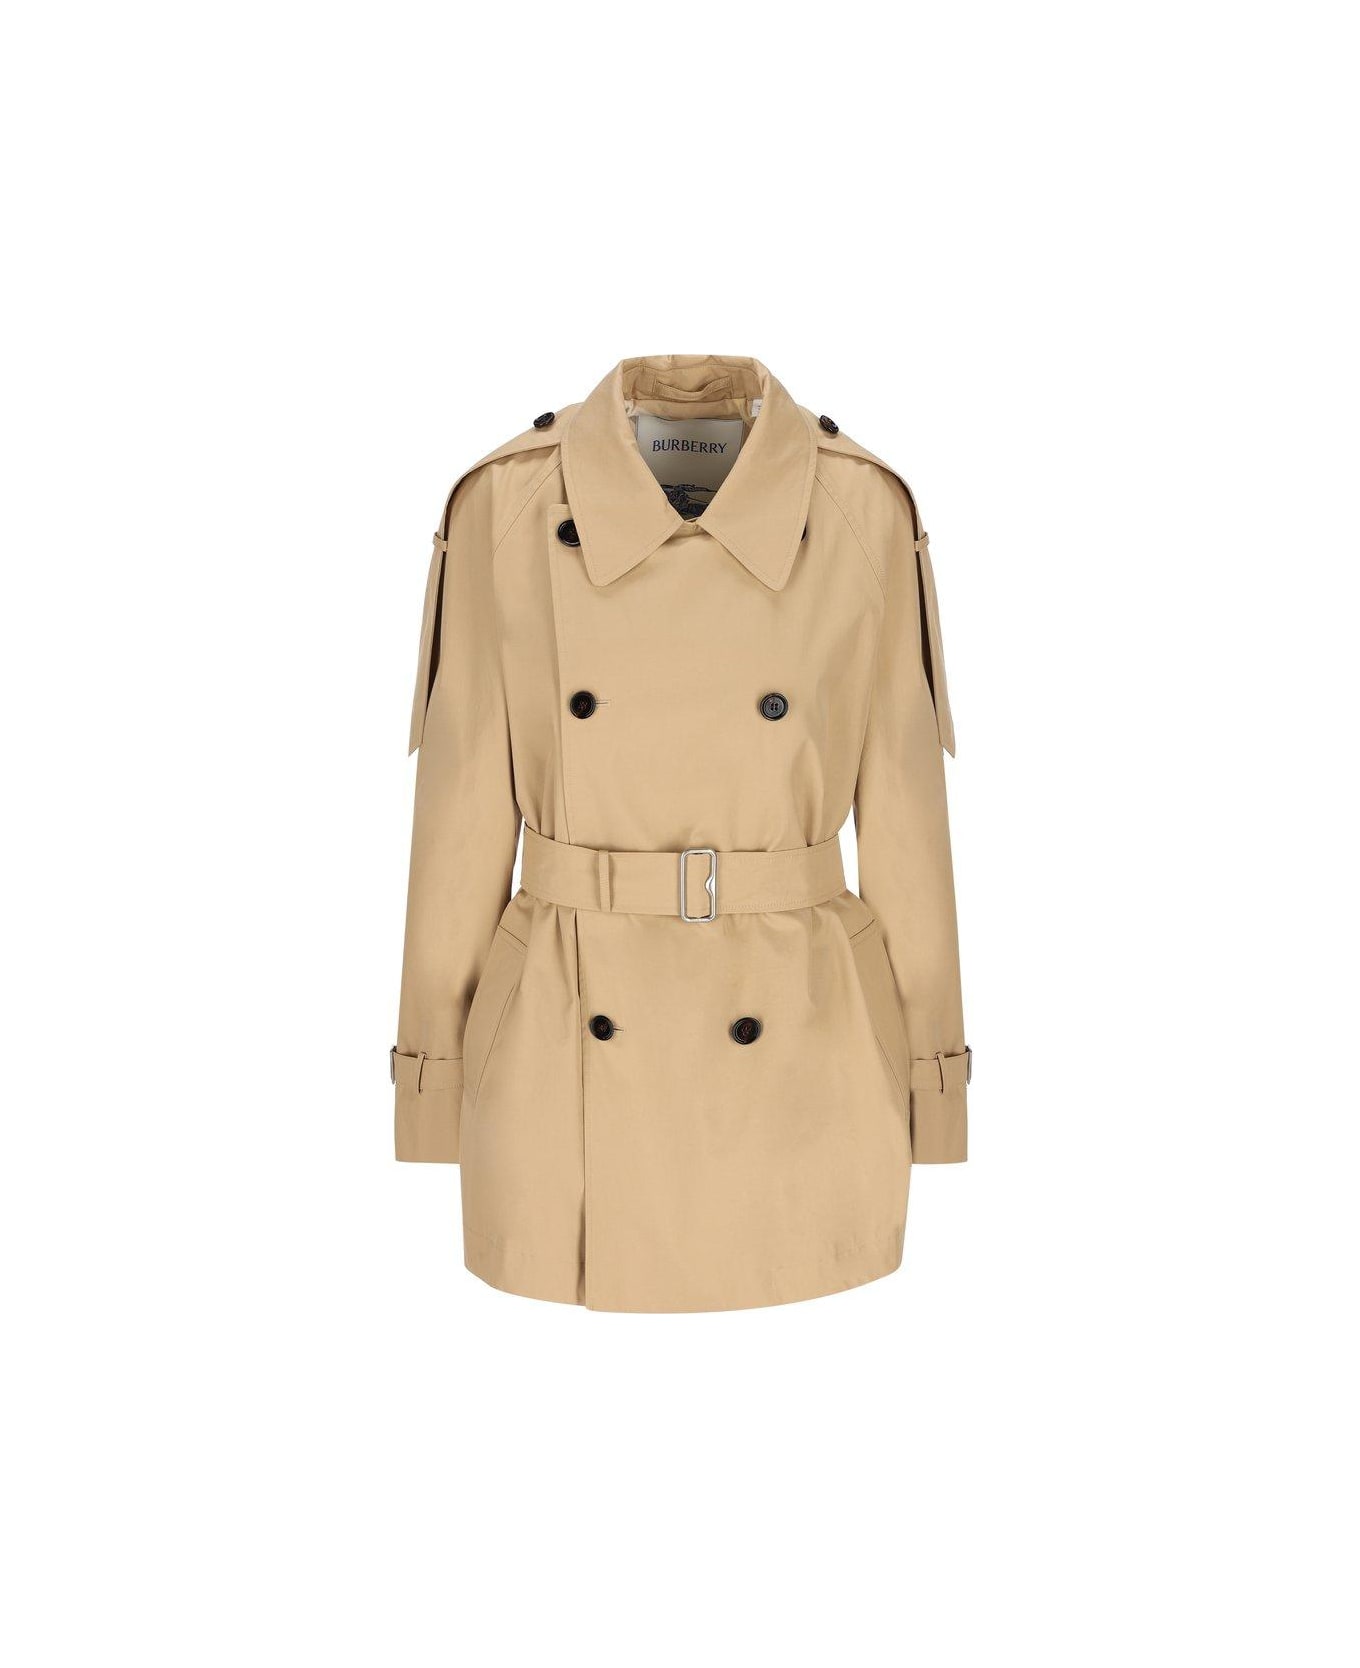 Burberry Double Breasted Belted Trench Coat - Flax